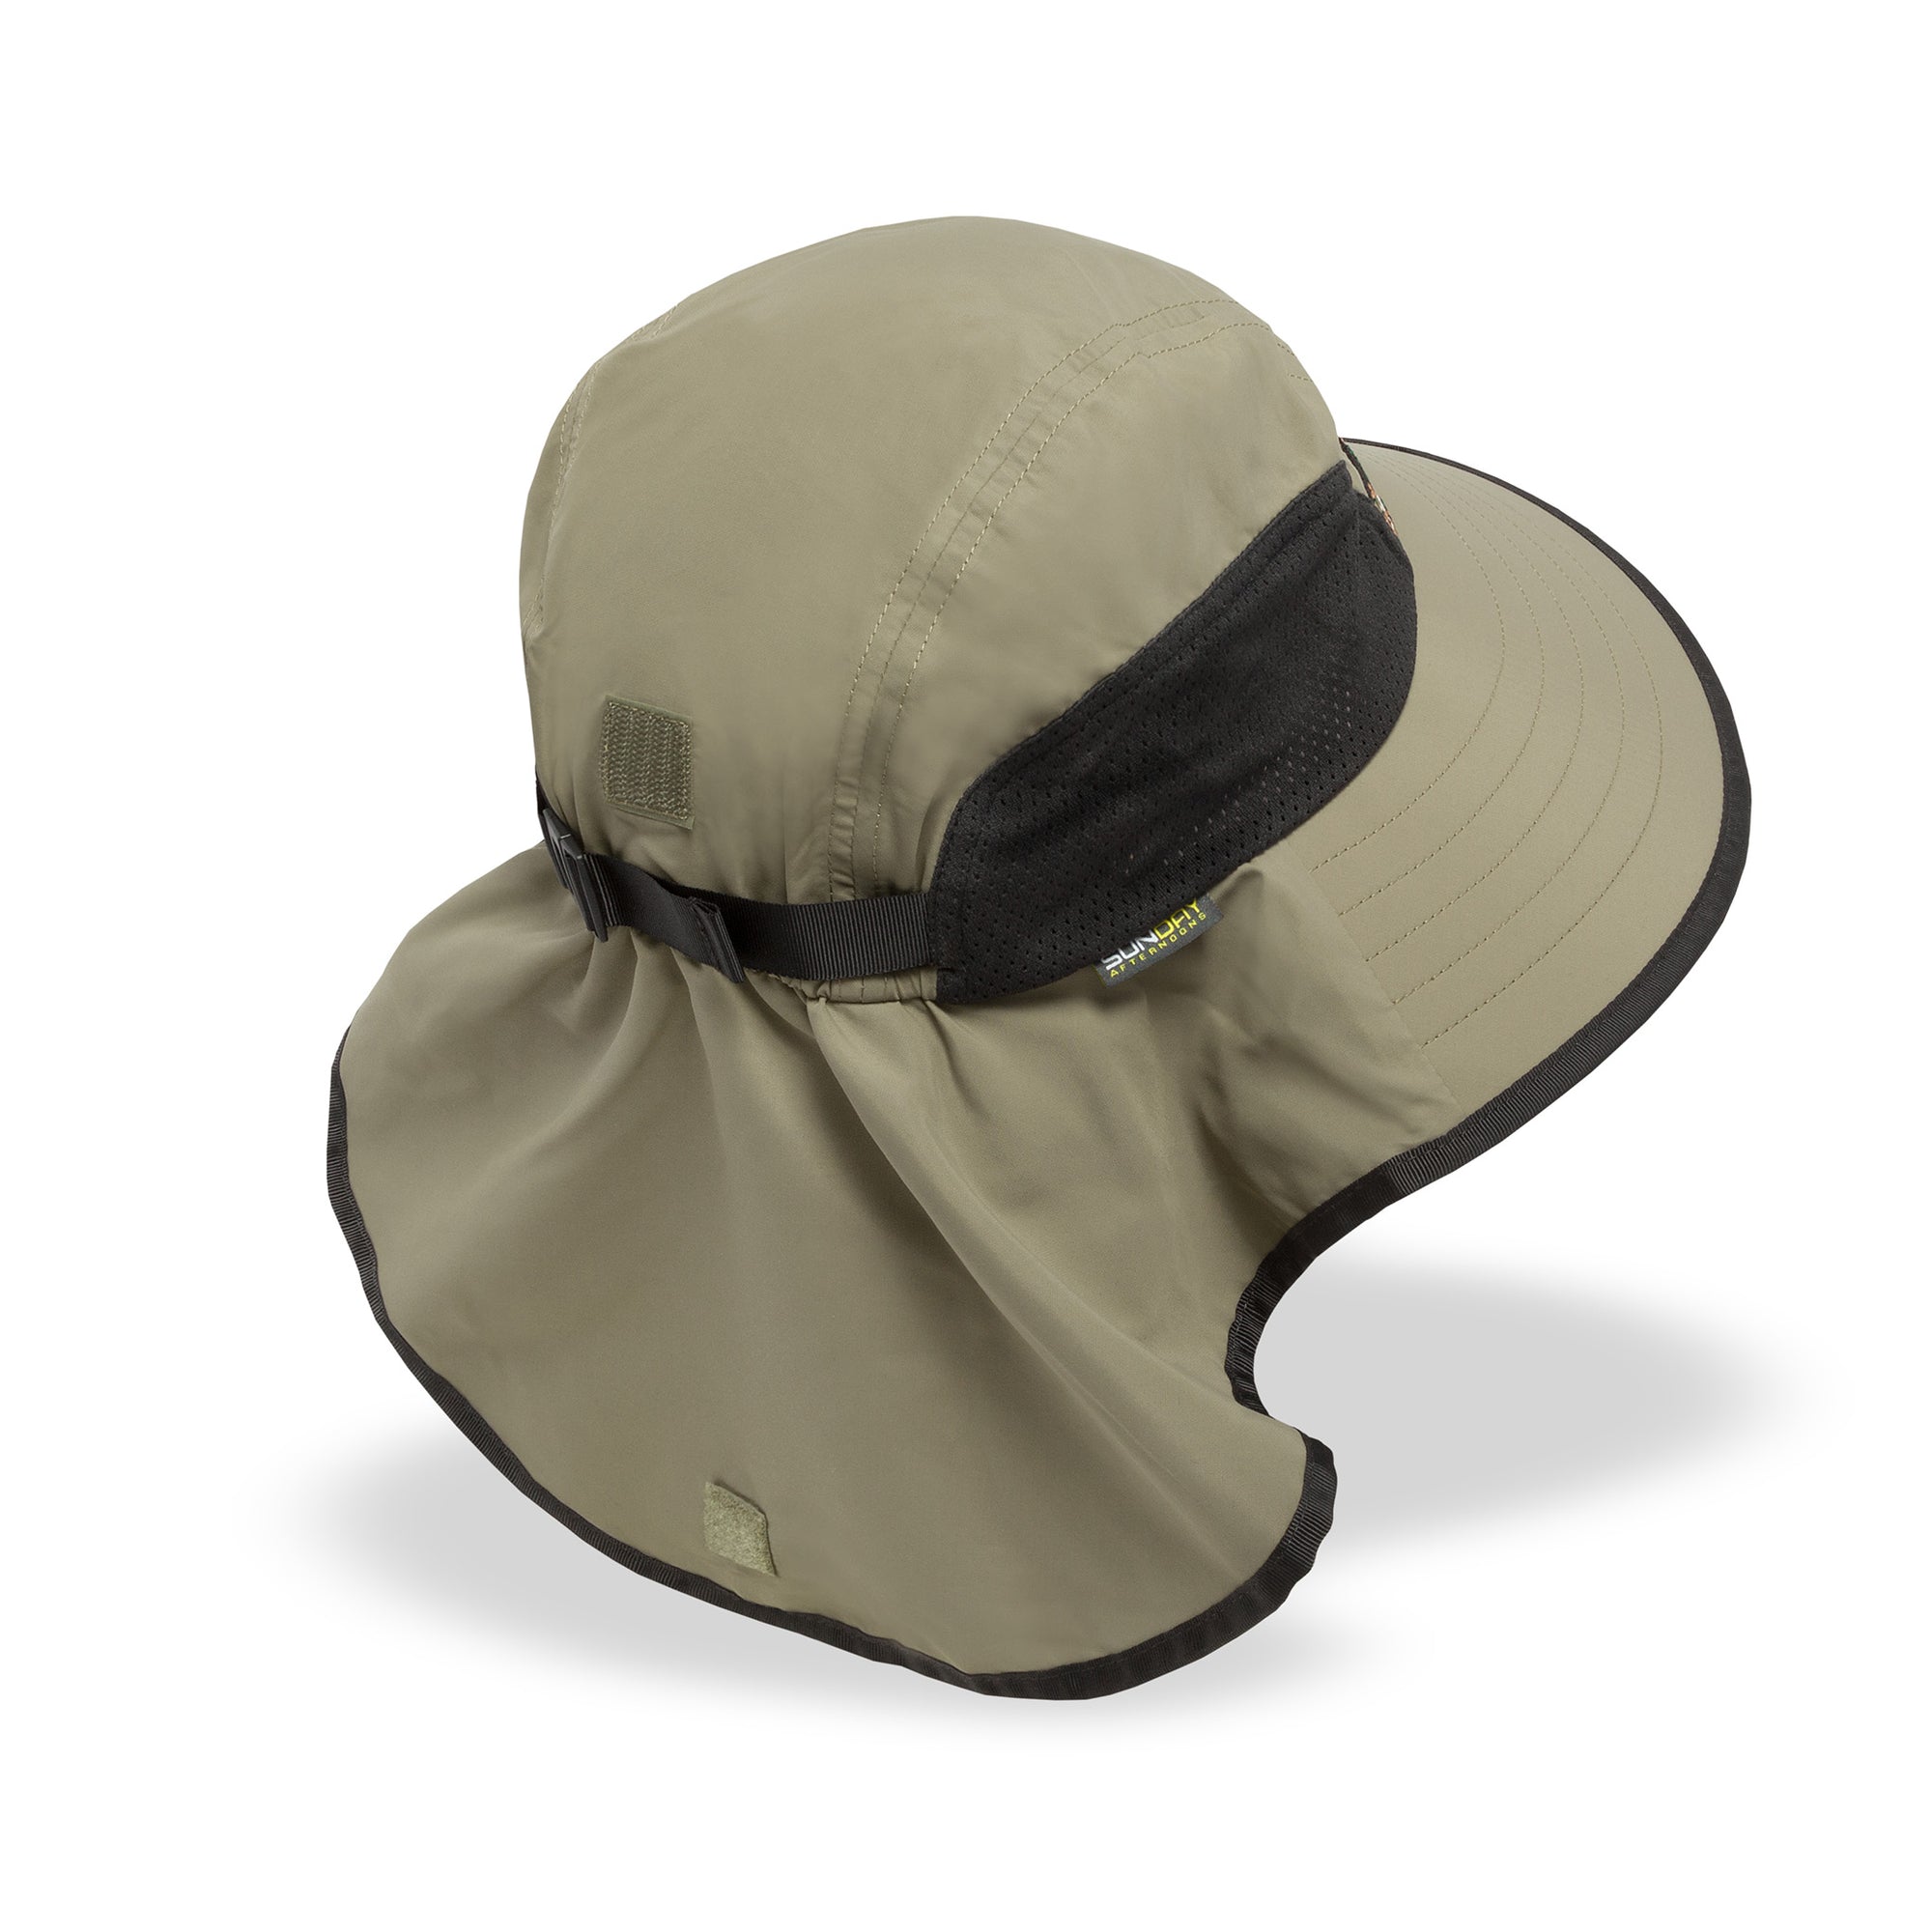 a photo of a sunday afternoon adventure hat in an adult size in sand, rear view